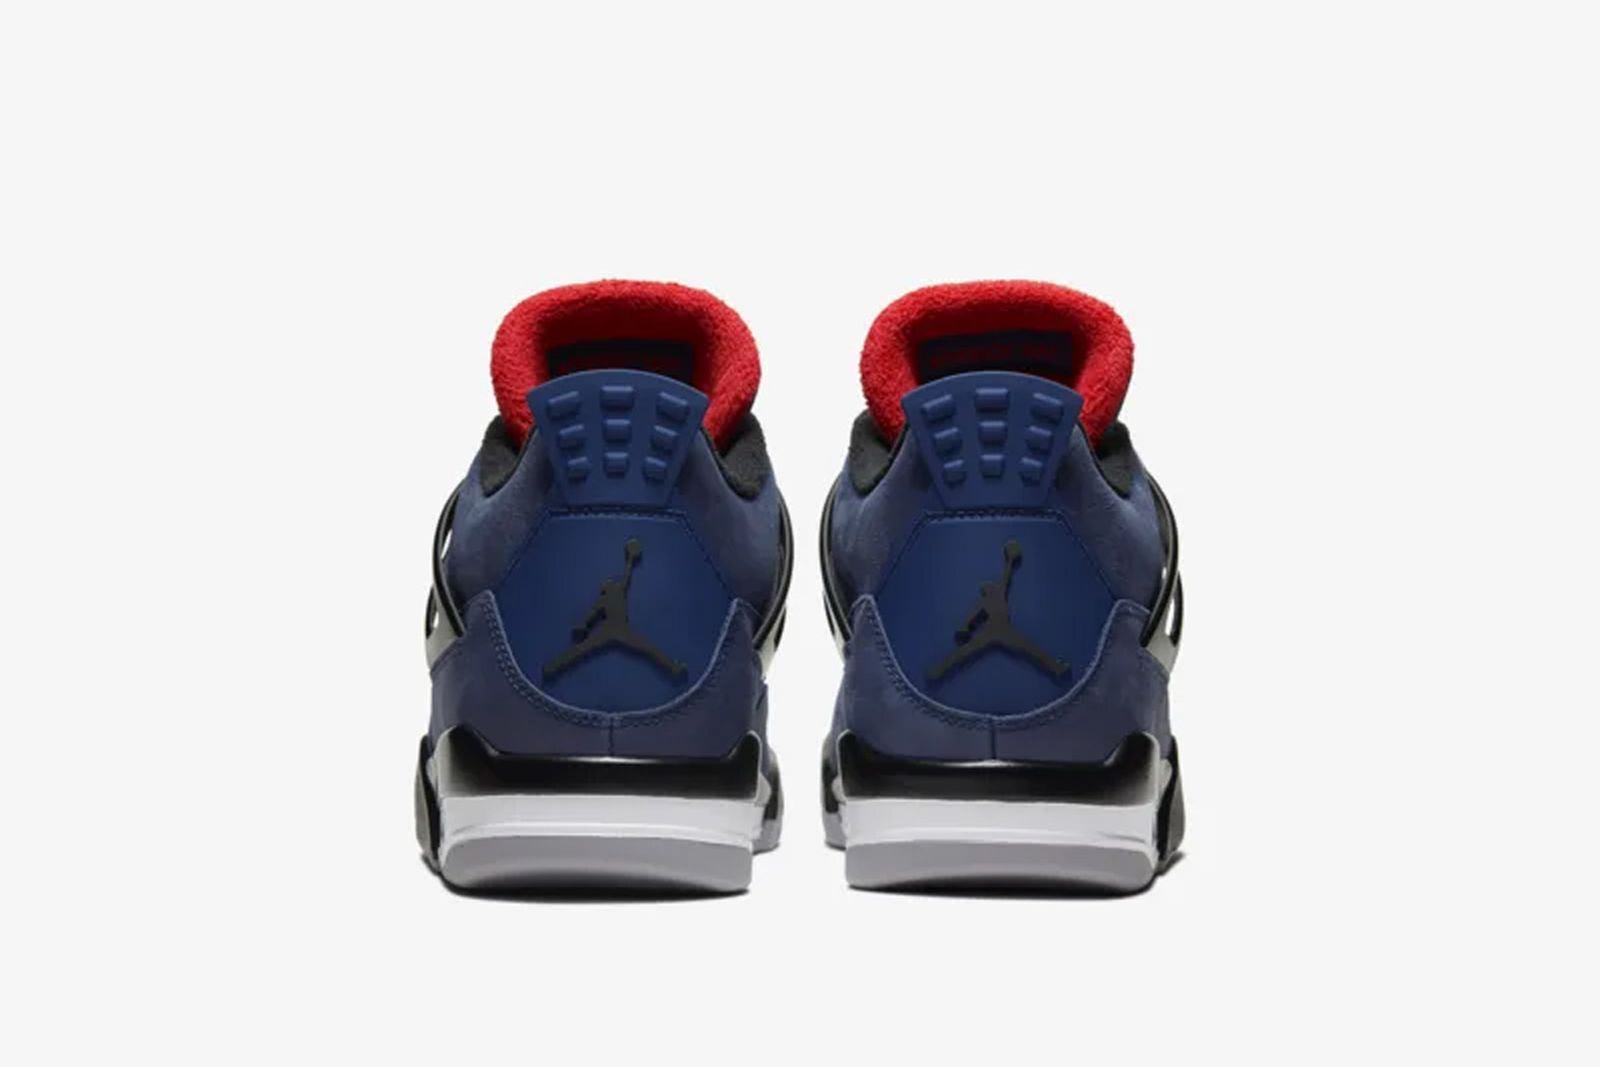 Nike Air Jordan 4 Winterized: Official Images & Where to Buy